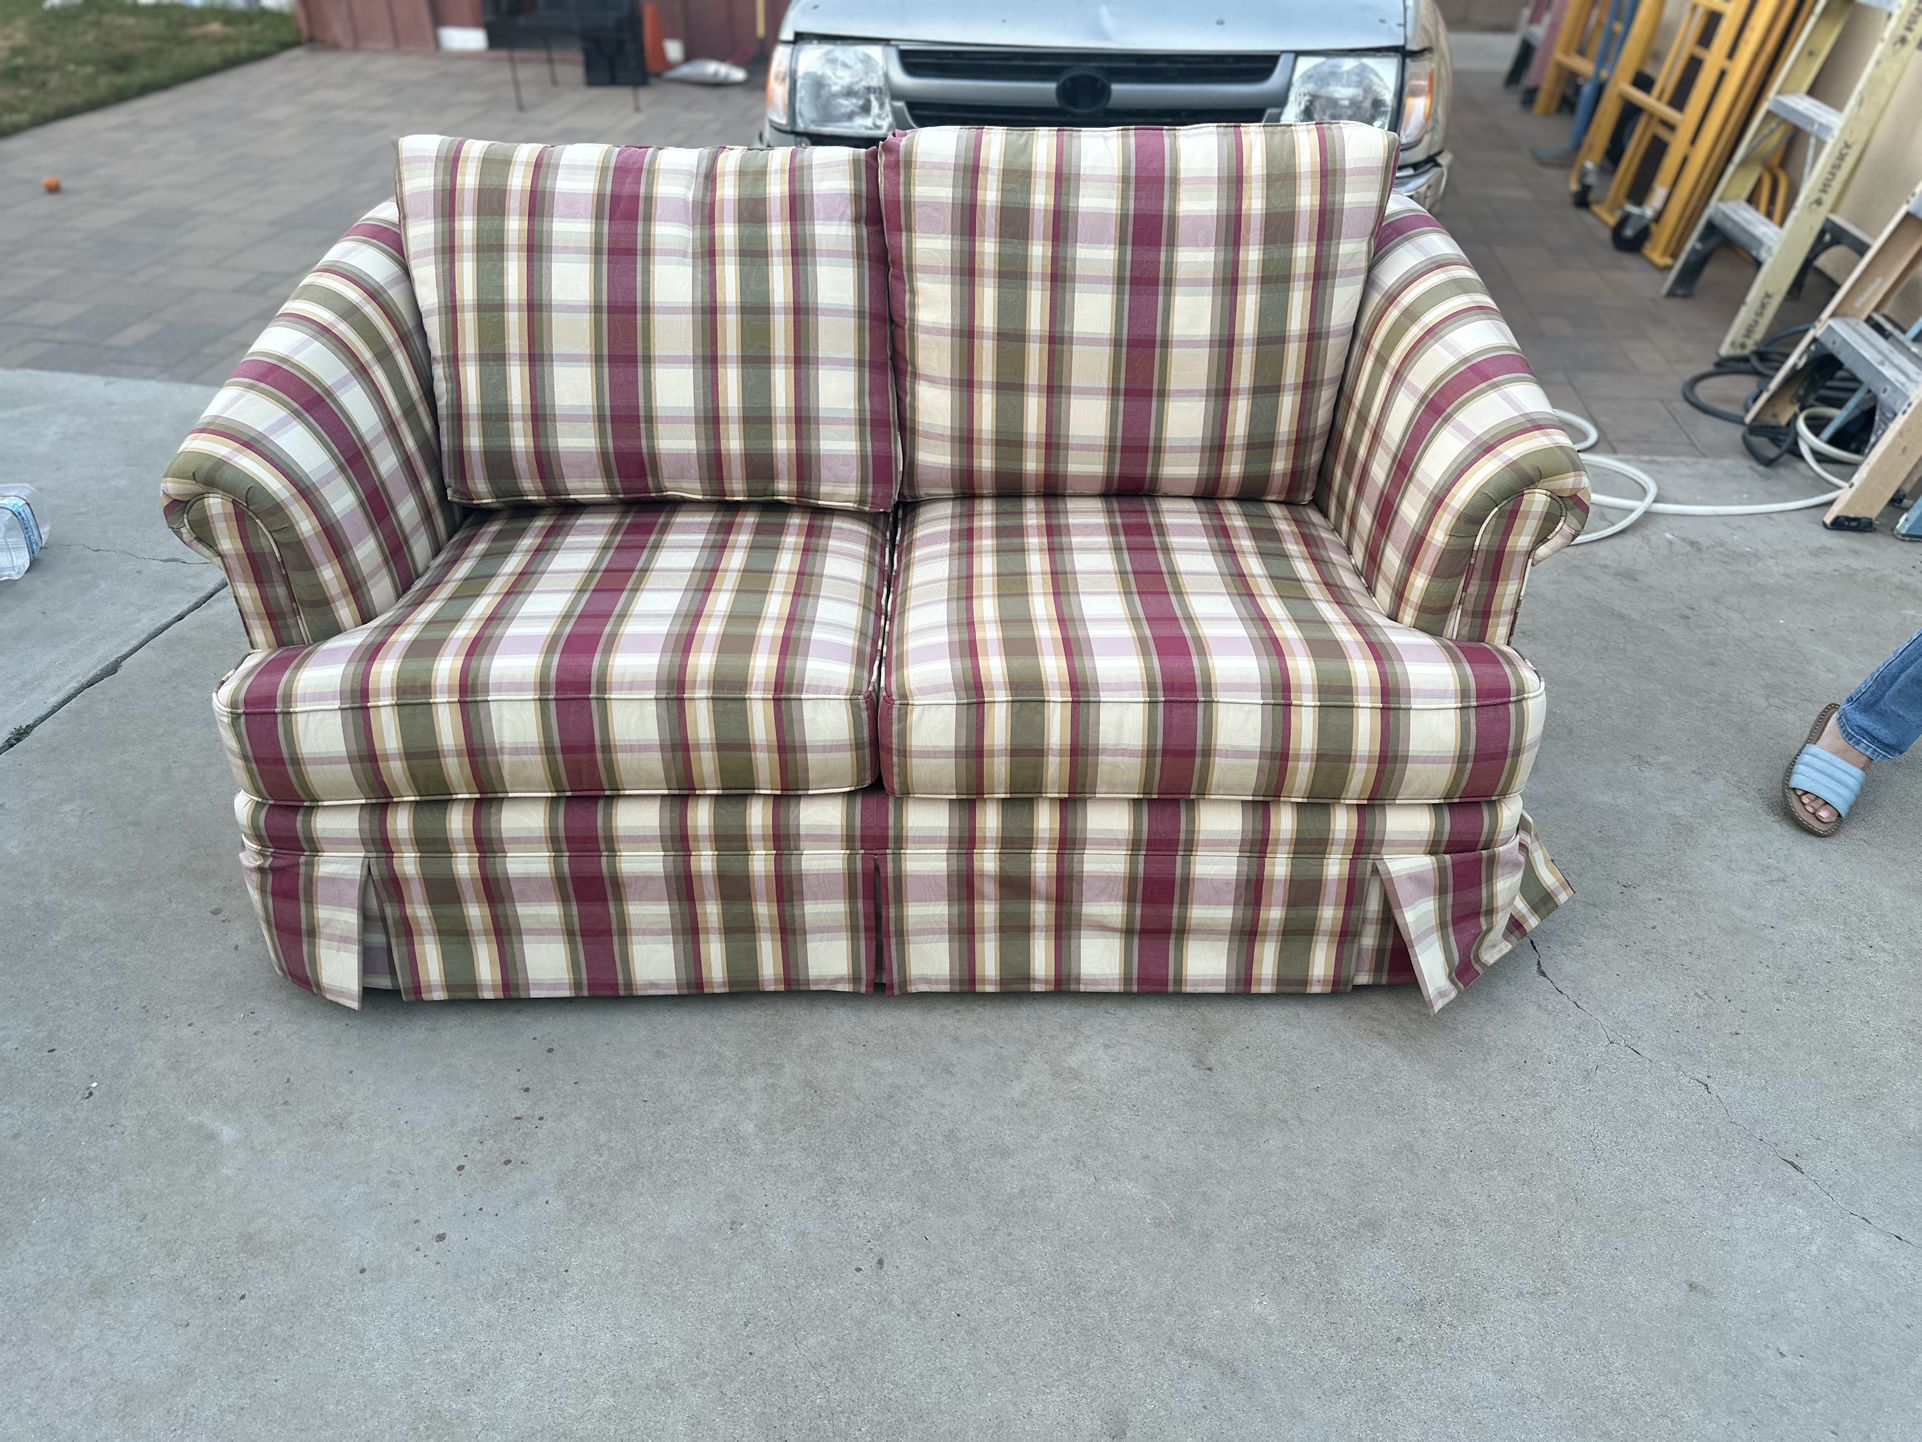 Vintage Couch For Sale 